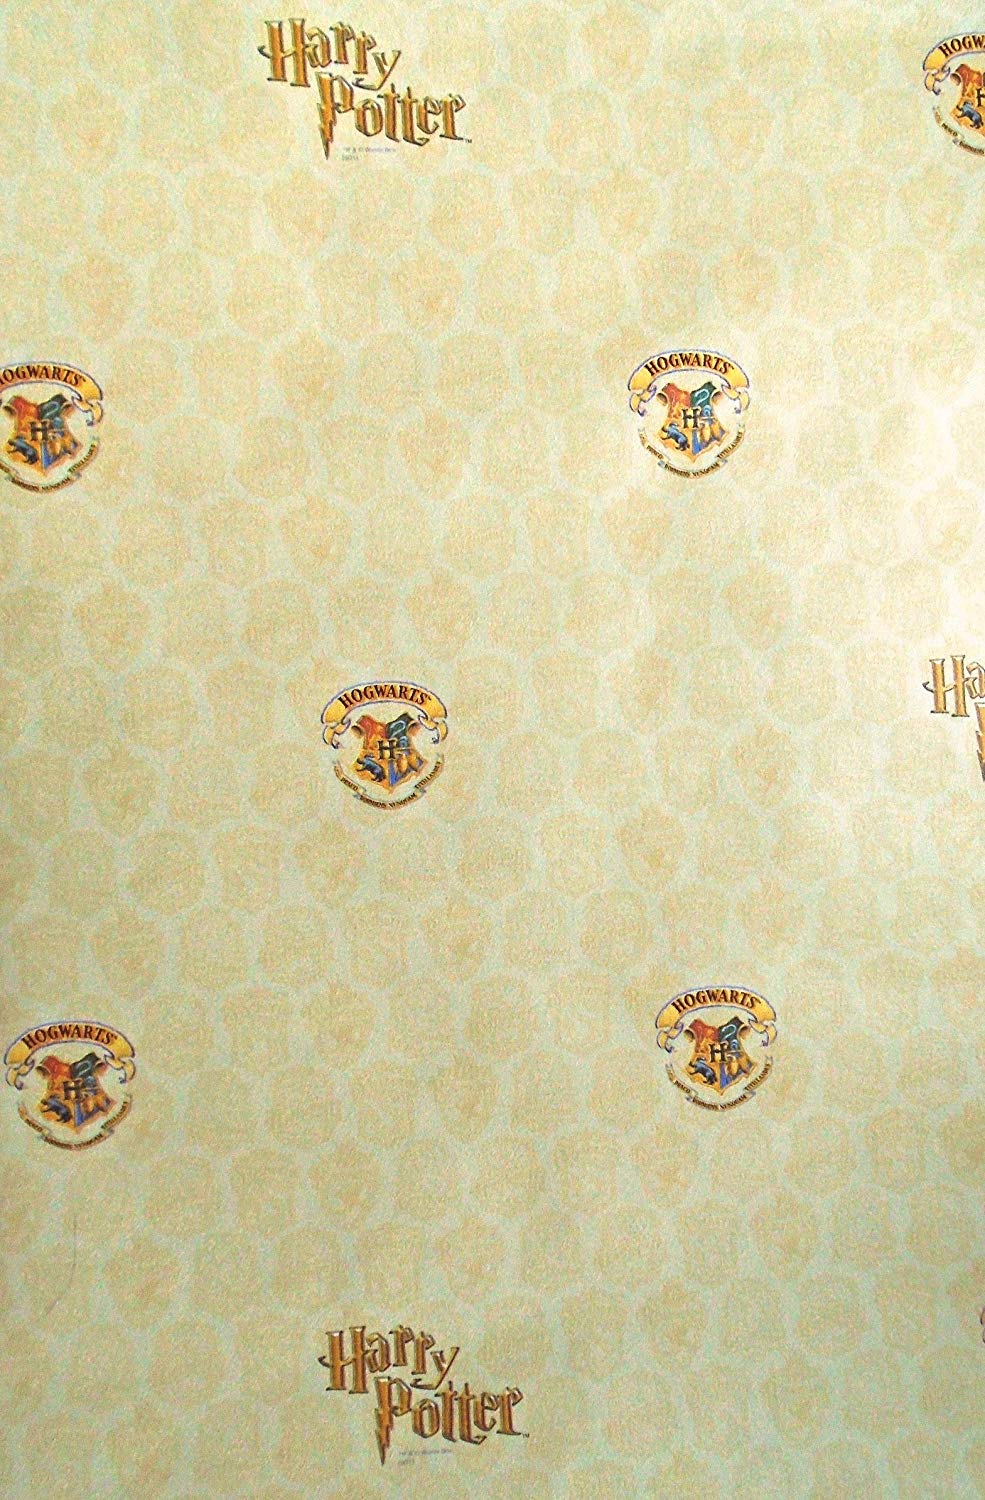 Hogwarts School Of Witchcraft & Wizardry Harry Potter - Pattern Harry Potter Background , HD Wallpaper & Backgrounds